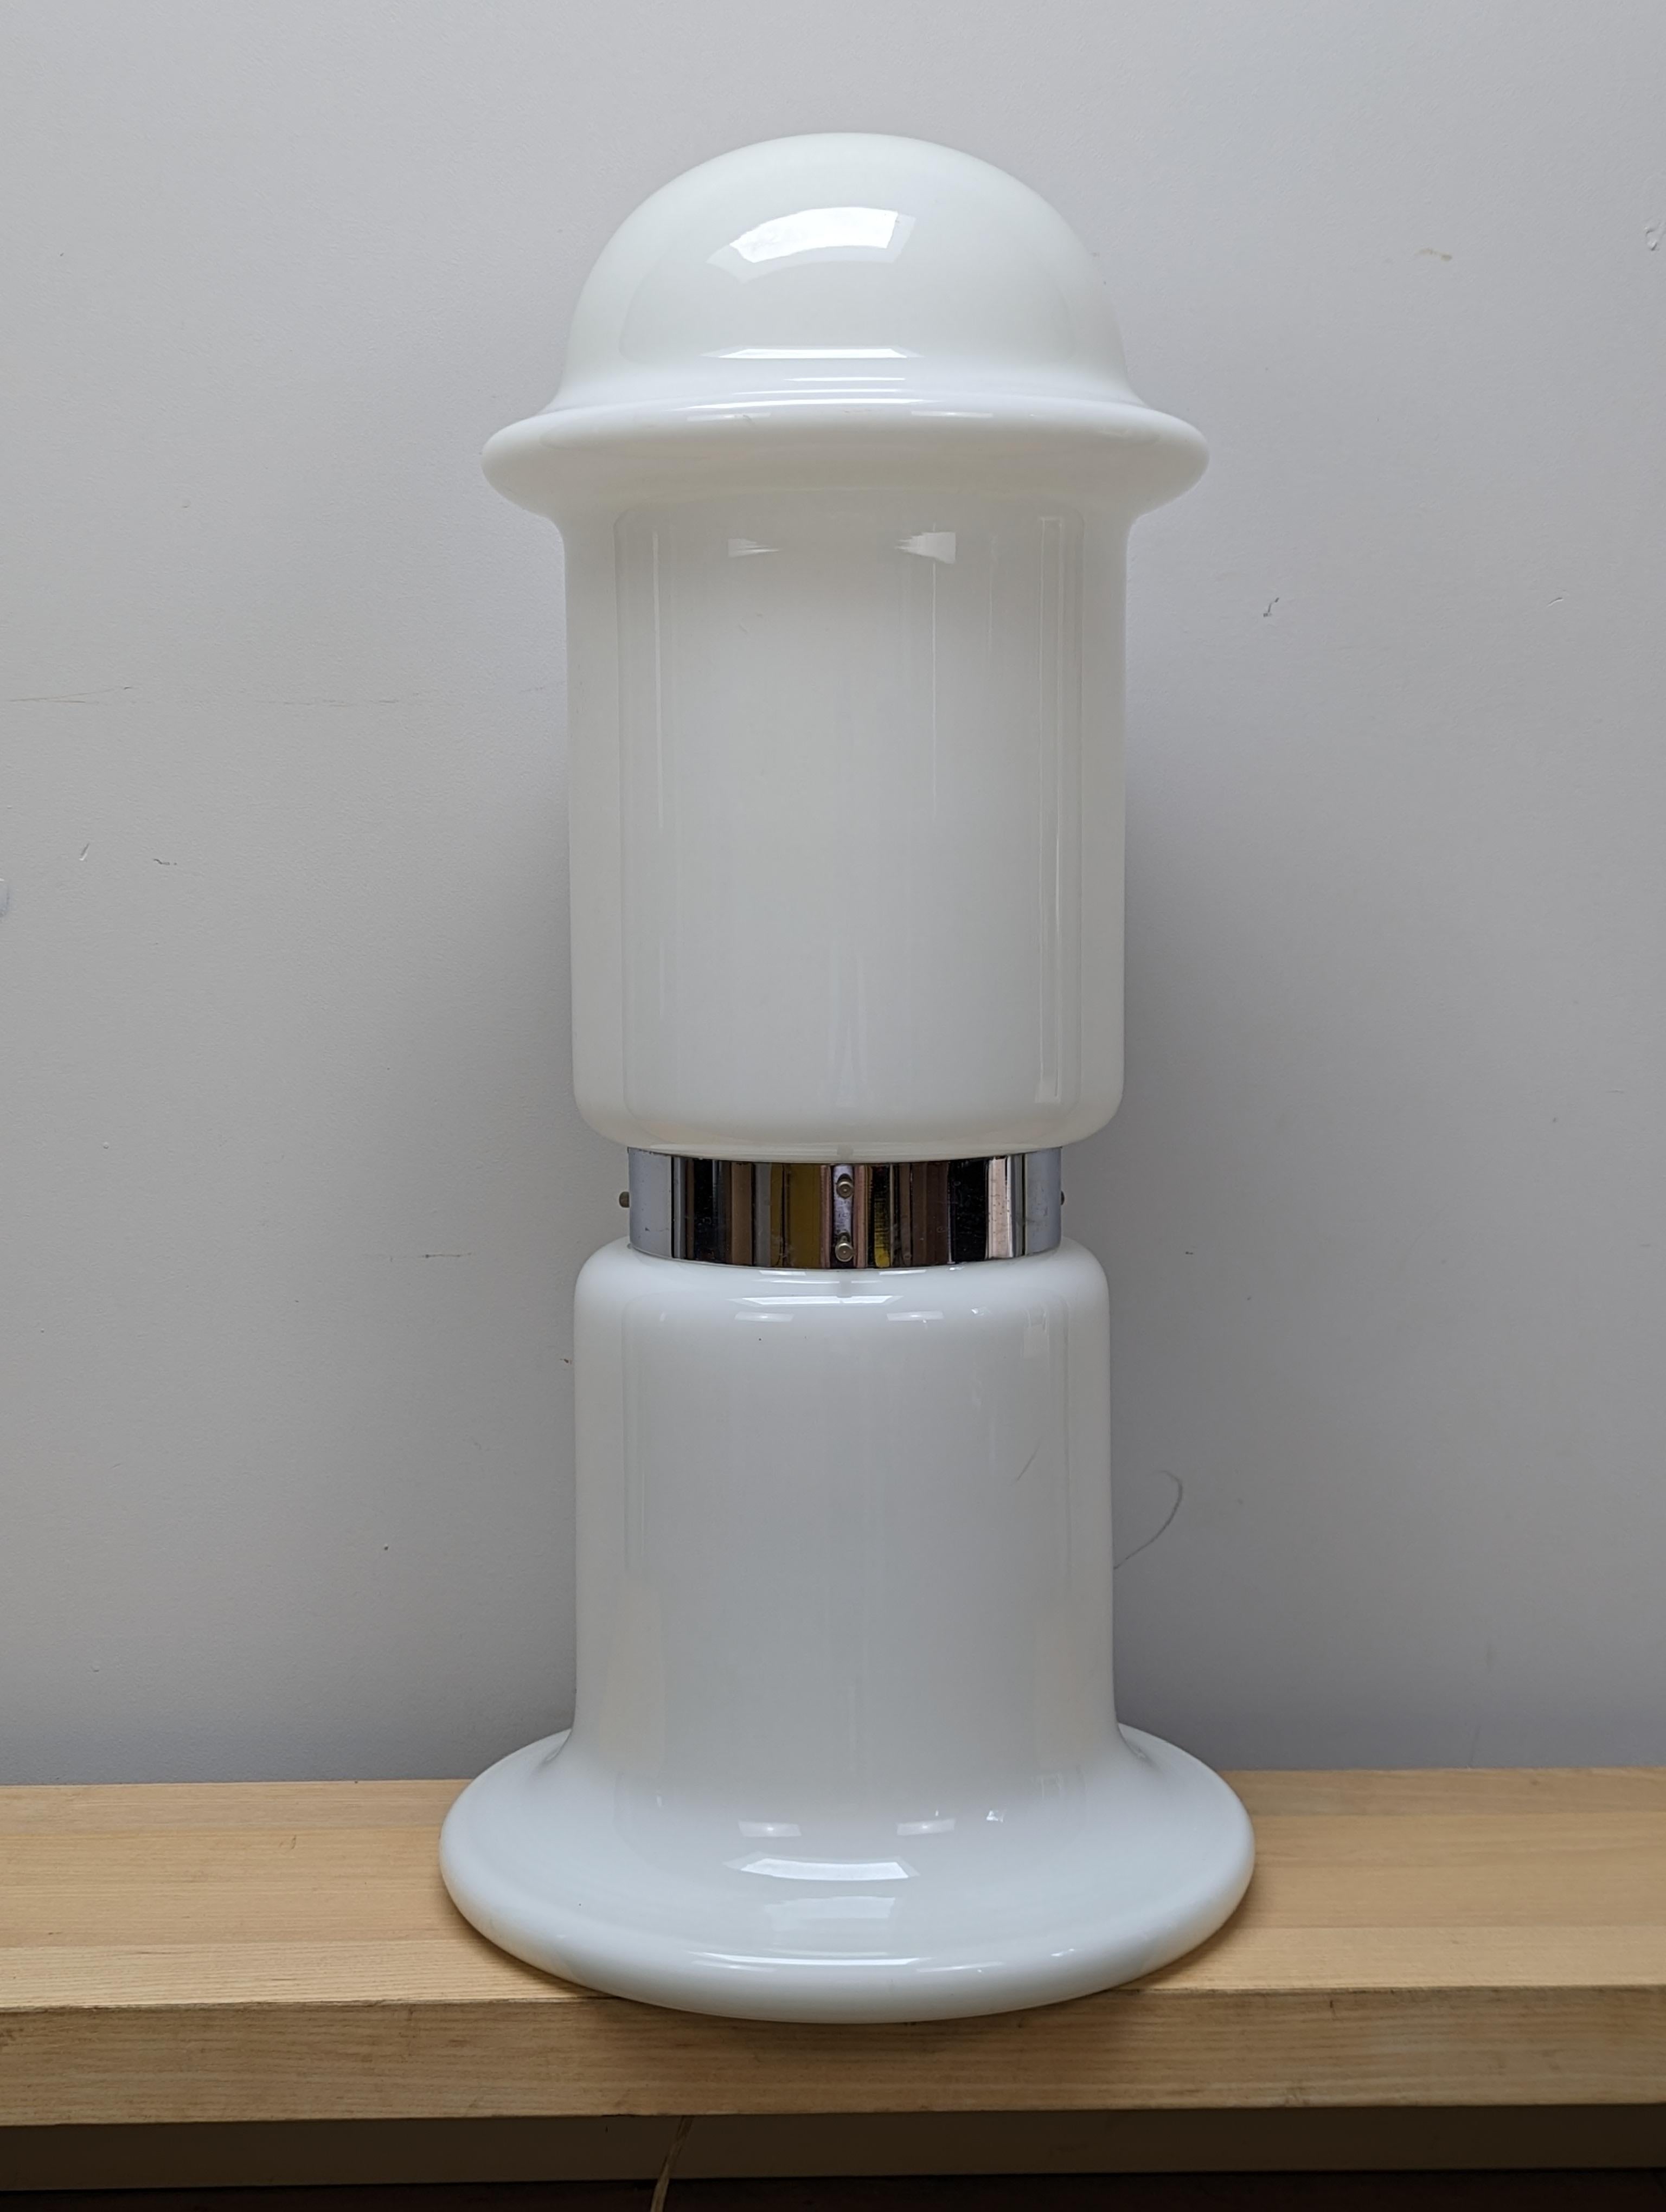 The lamp was designed by Karel Volf. The lamp is made of milky triplex opal glass and consists of two parts, the base and the top shade. They are divided in the middle by a metal ring. When lit, it produces a very pleasant dim light.

Glass floor